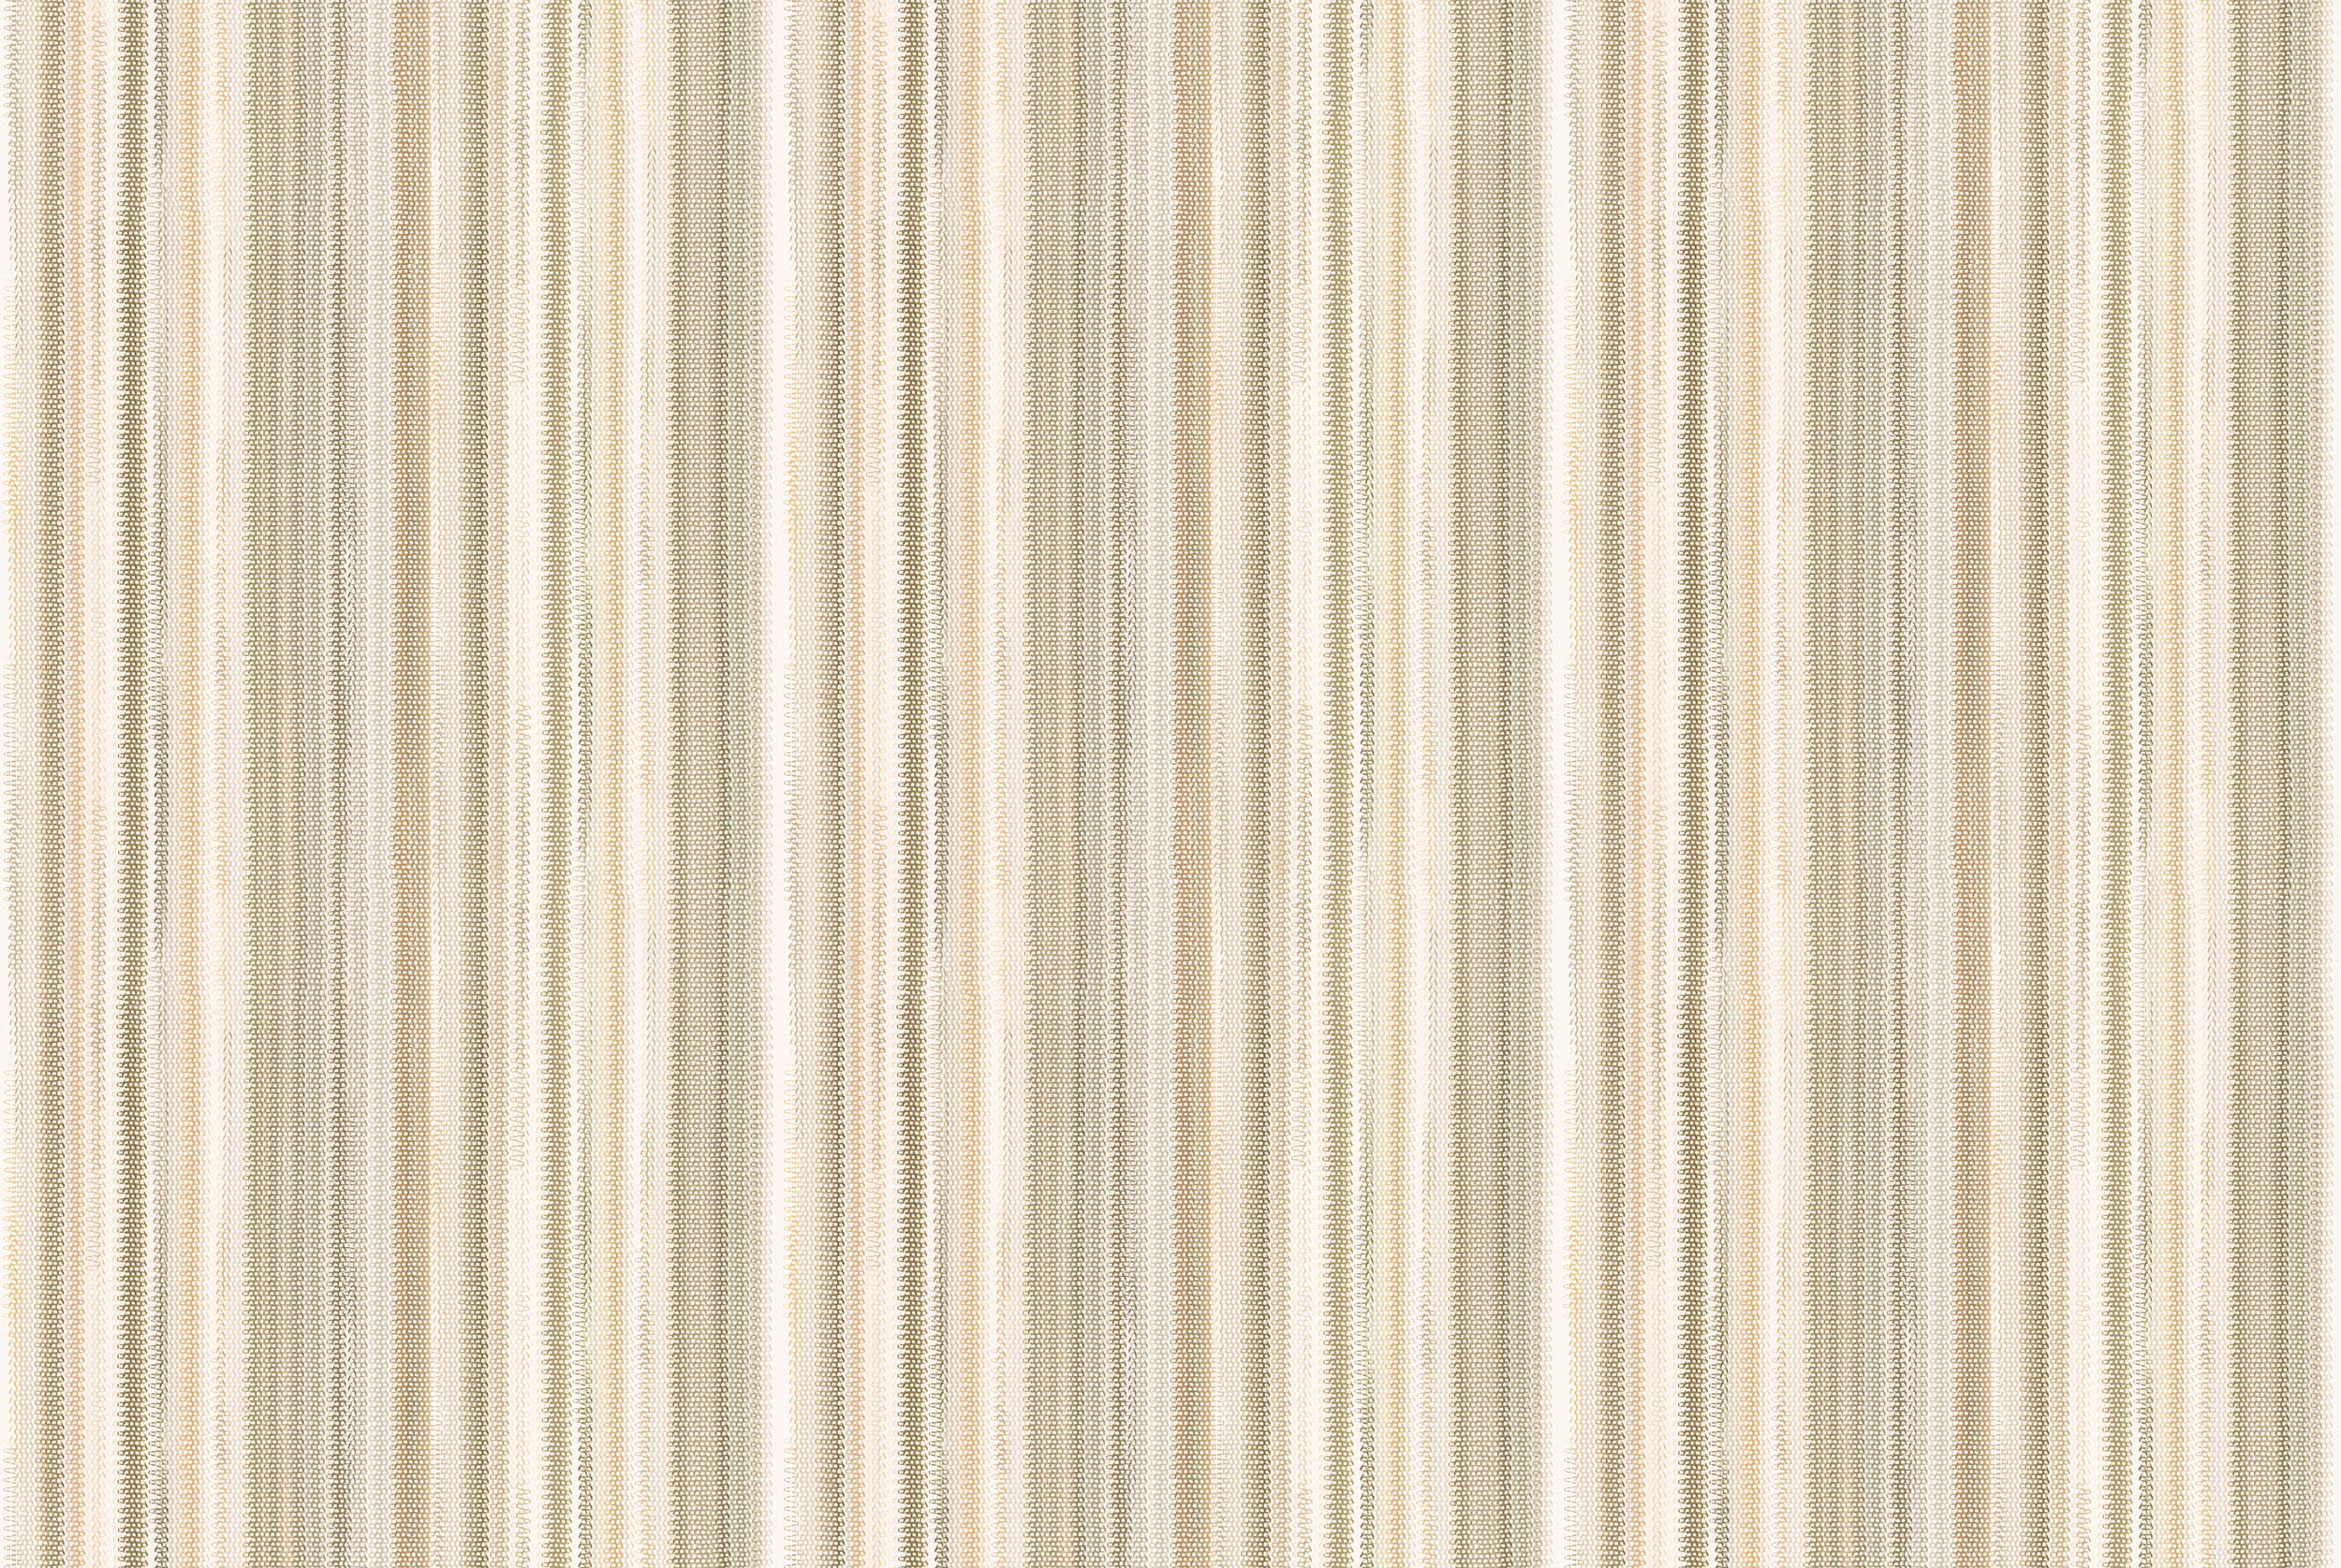 Missoni Home Wallcoverings 04 Striped Sunset 10398